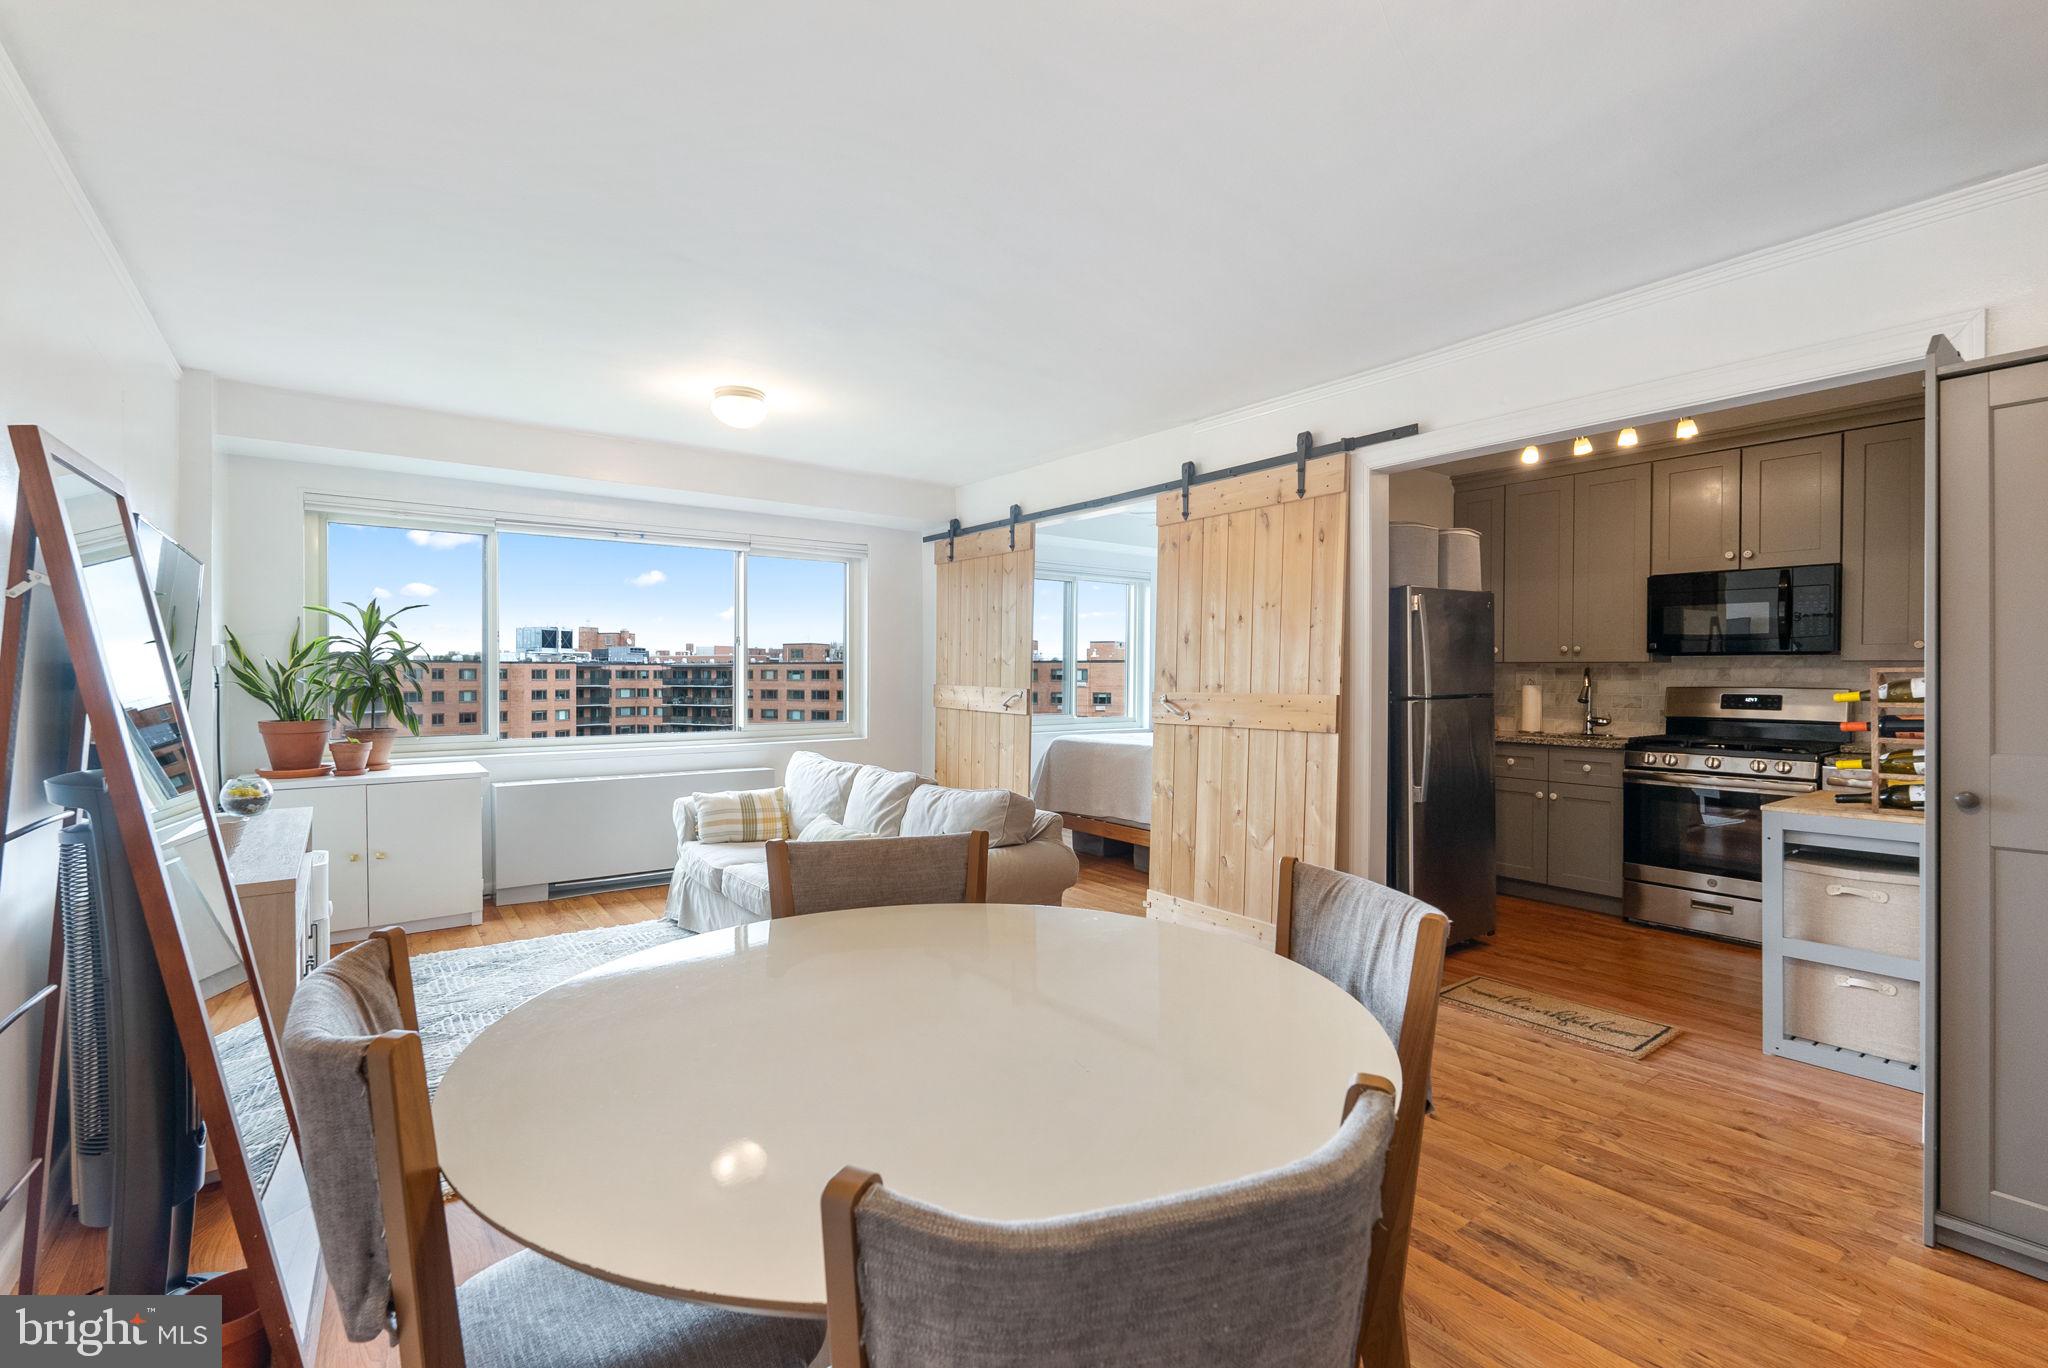 a living room with stainless steel appliances a dining table wooden floor and a kitchen view